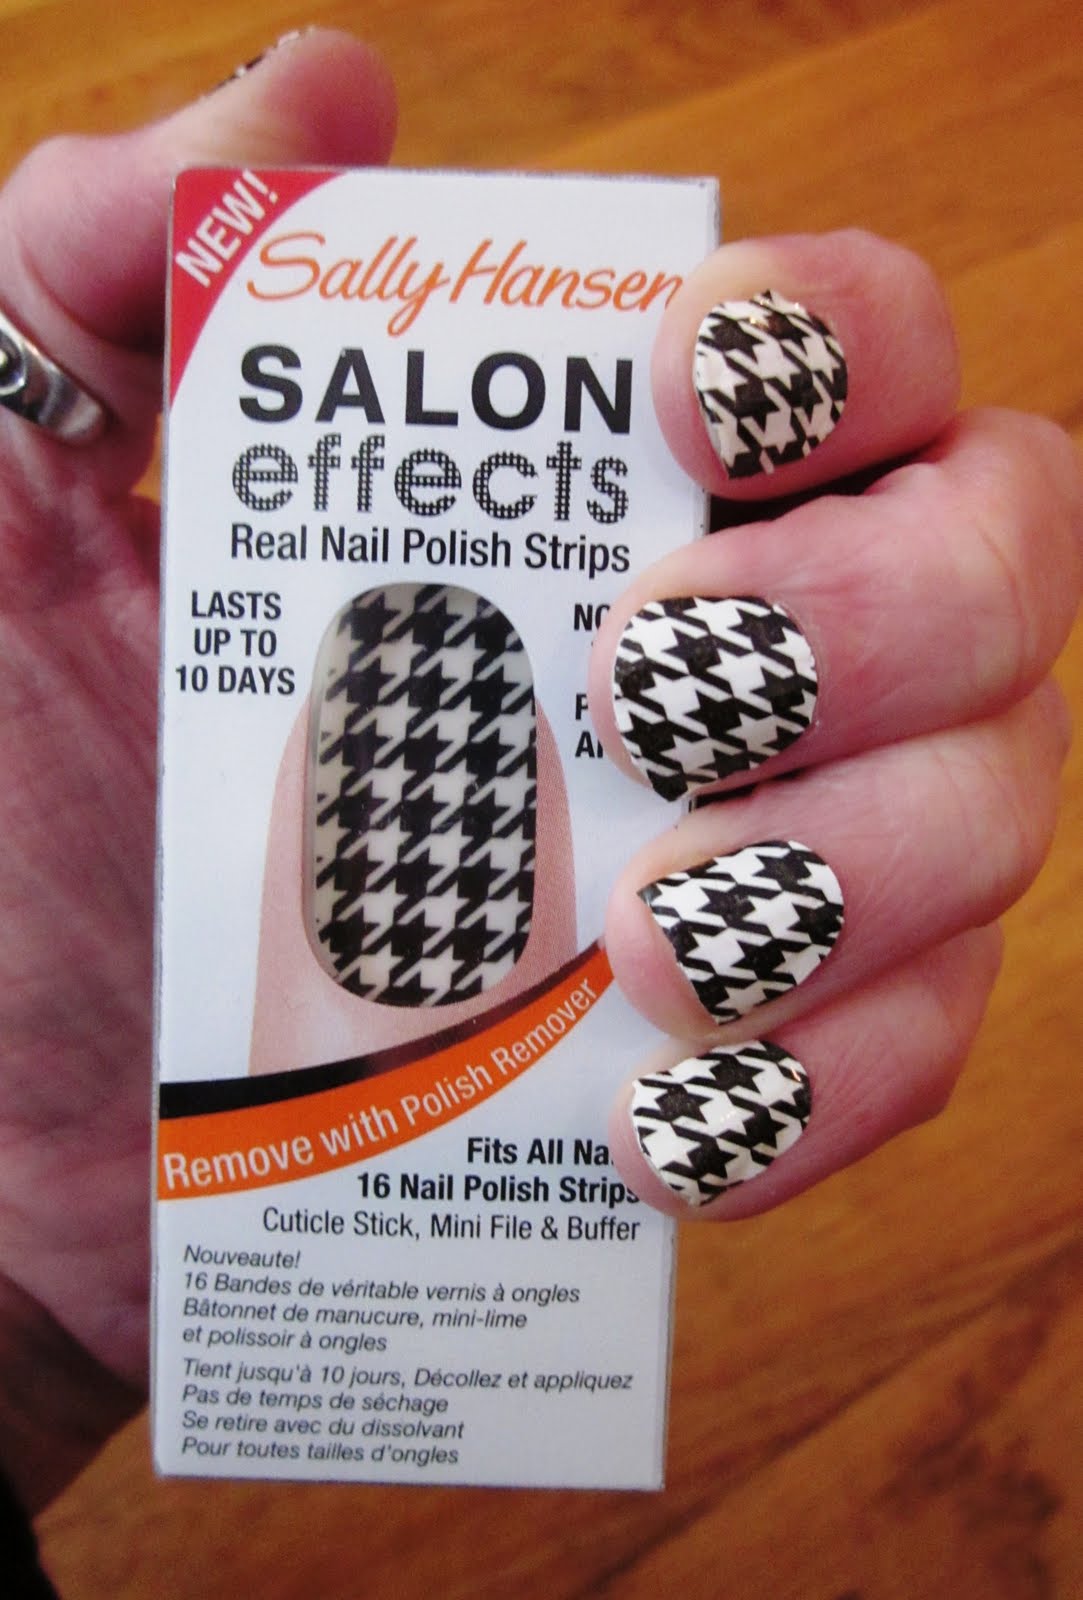 Presenting Sally Hansen's newest product: Salon Effects Nail Polish Strips